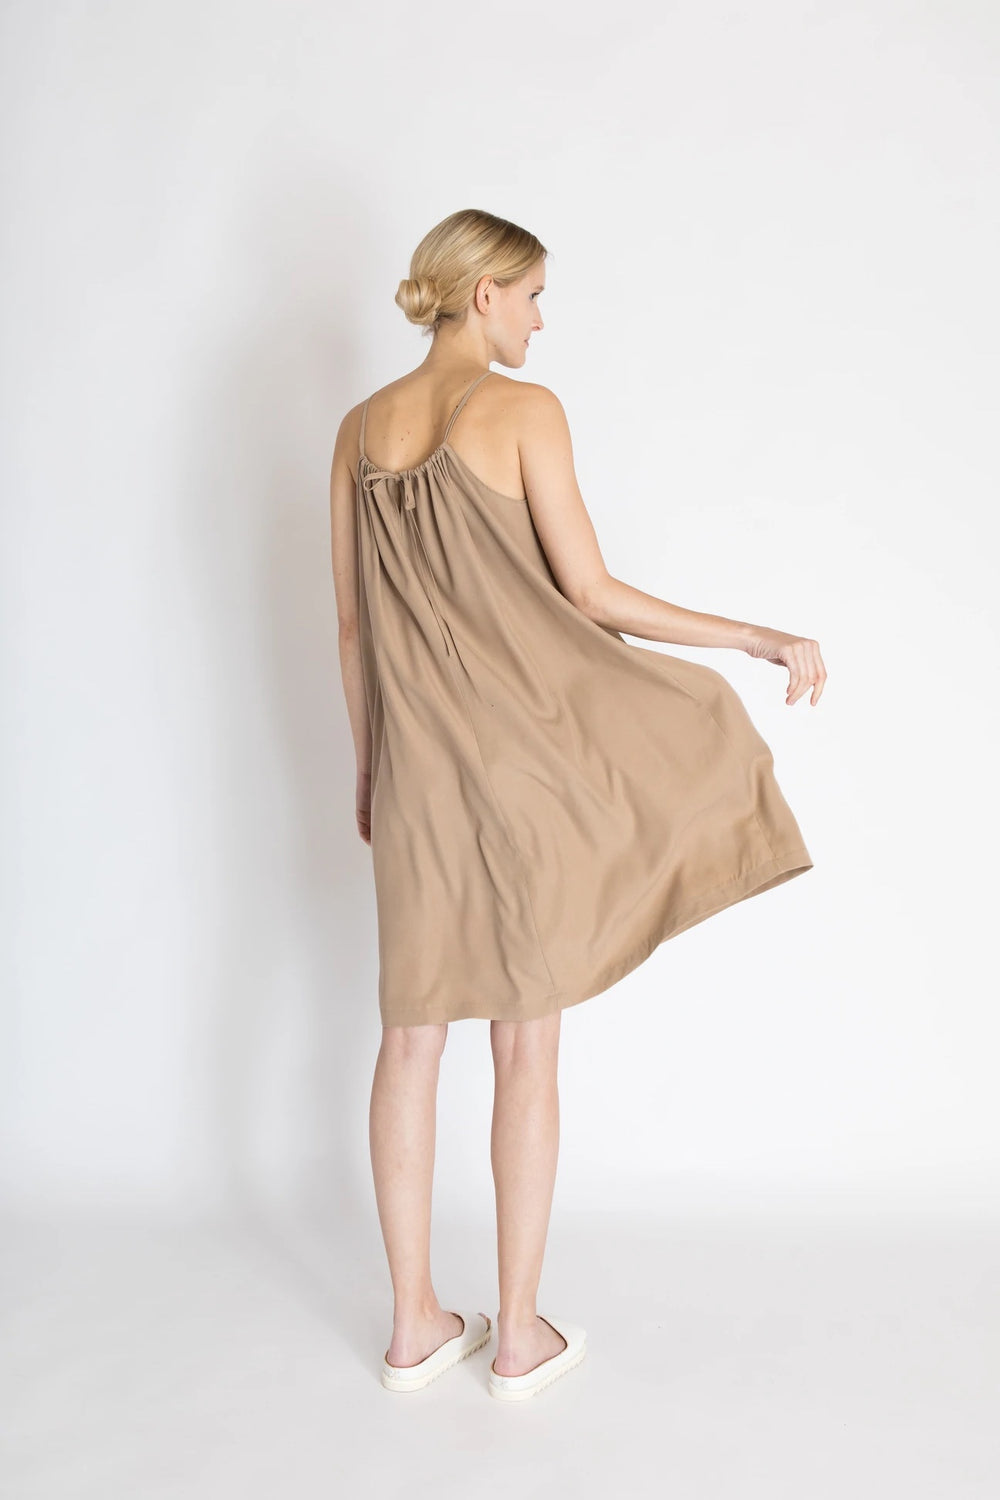 Woman wearing the Greta Dress sewing pattern from Bara Studio on The Fold Line. A sun dress pattern made in cotton, linen or tencel fabrics, featuring a loose wide fit, thin shoulder straps, side slits, neckline gathers, back neck bow closure and knee len